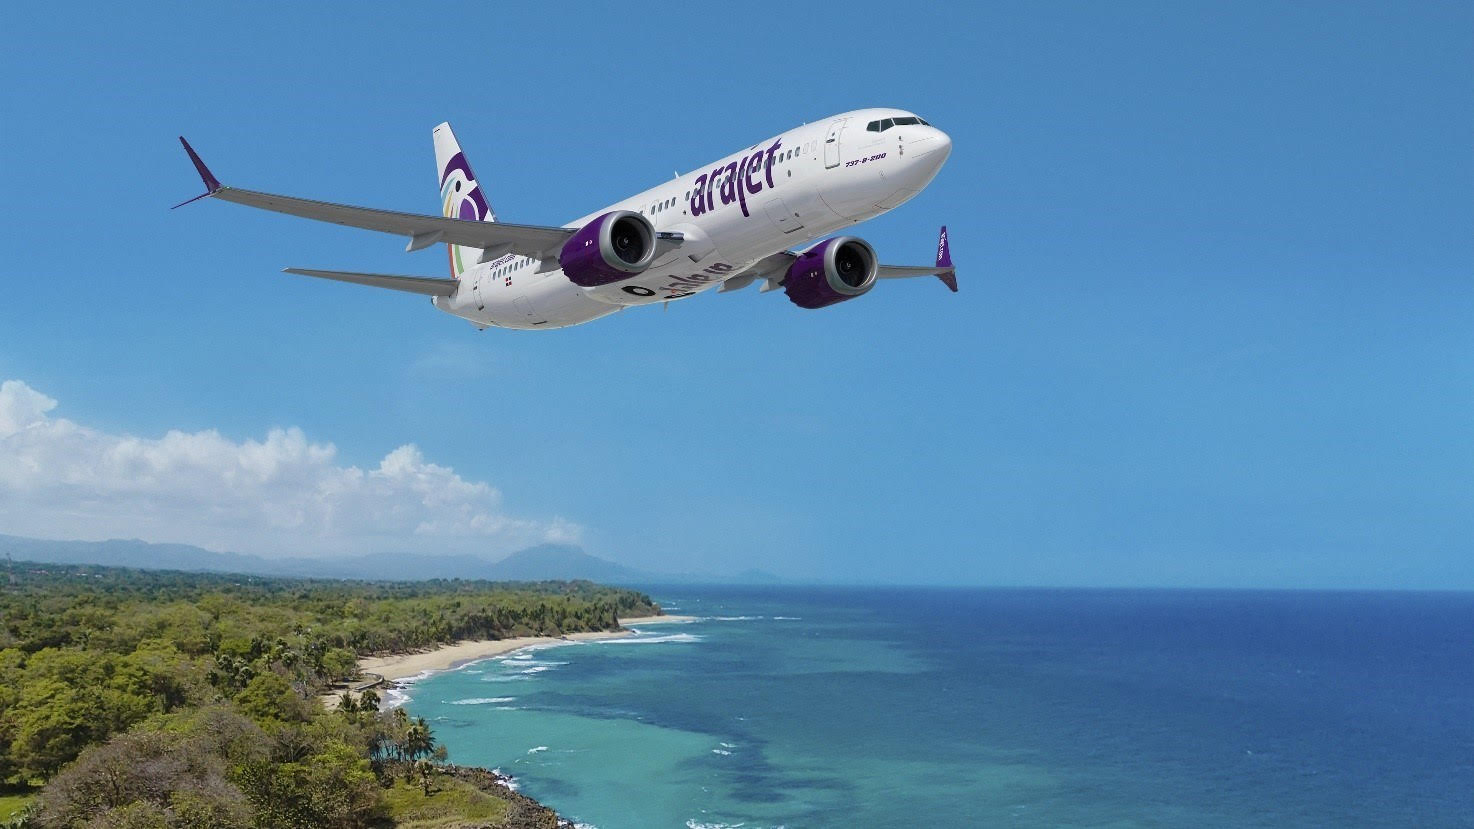 New Caribbean Airlines, AraJet Orders 20 737 MAX Jets